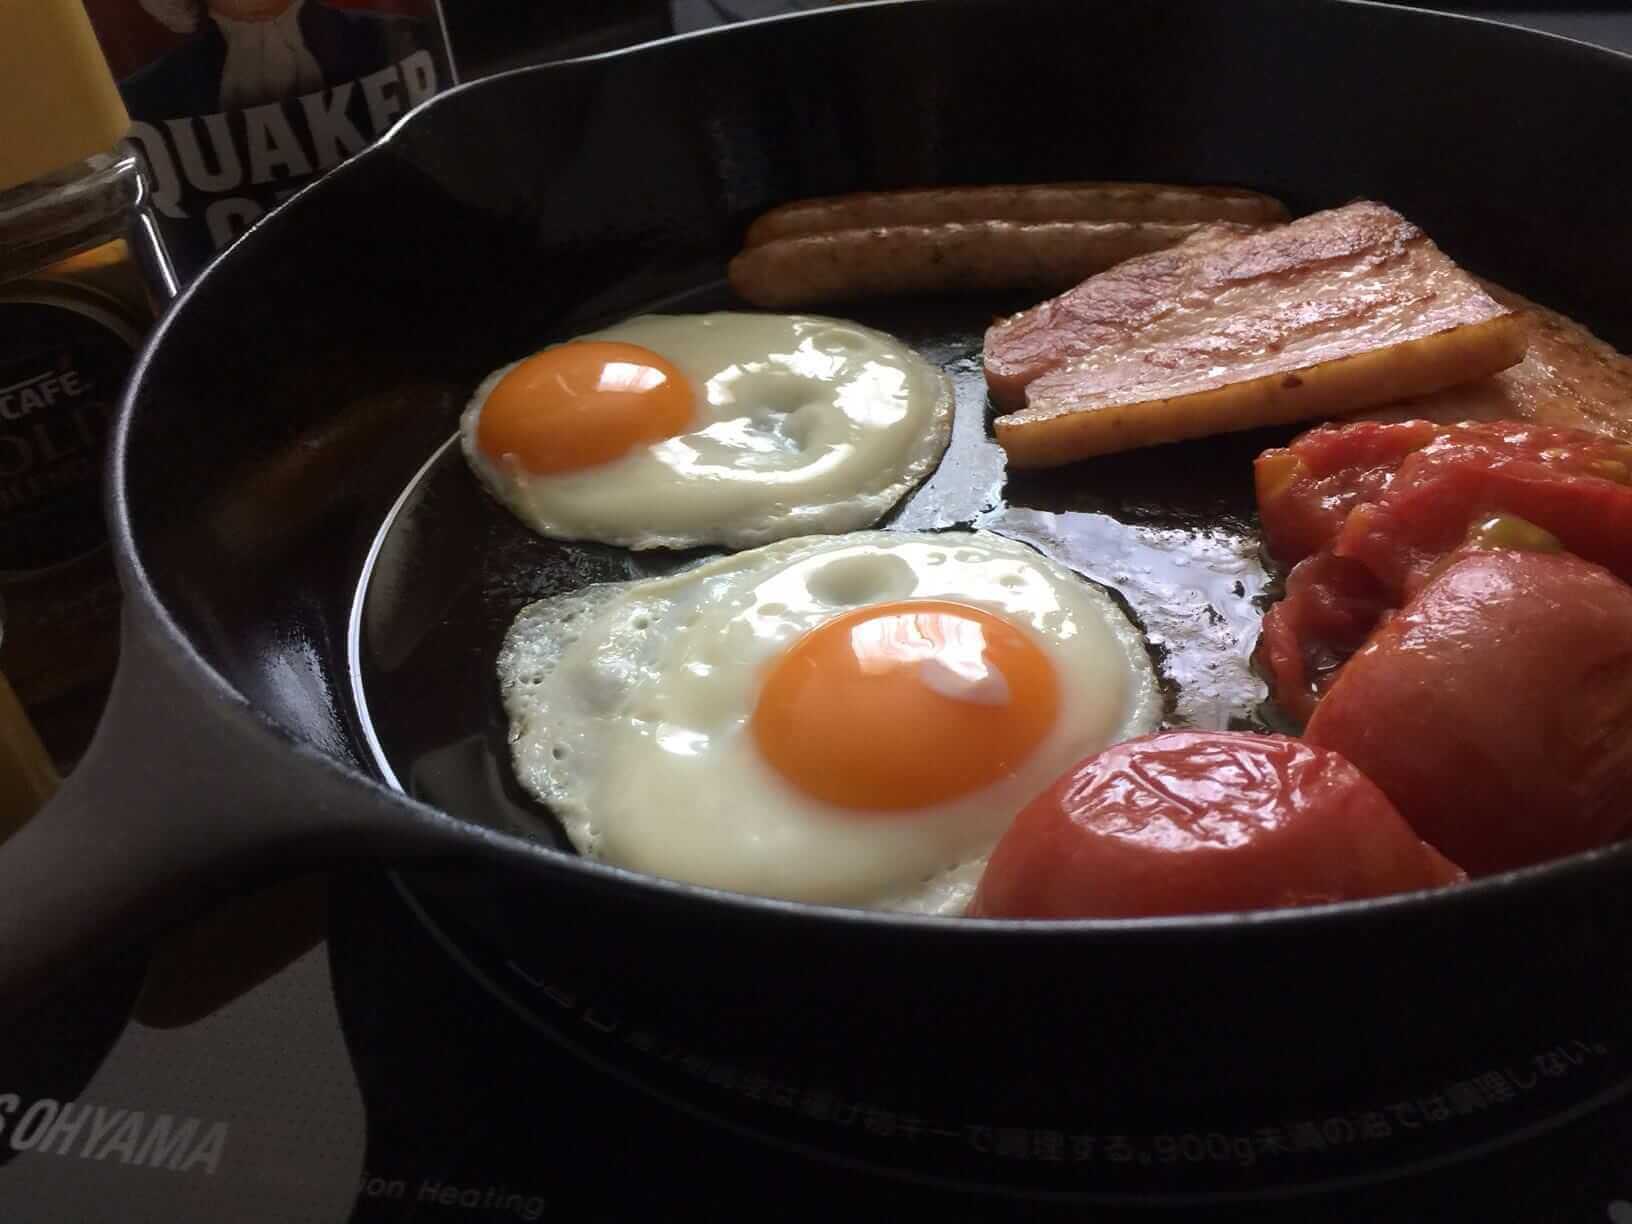 Simple guide to the pros and cons of cast iron cookware.